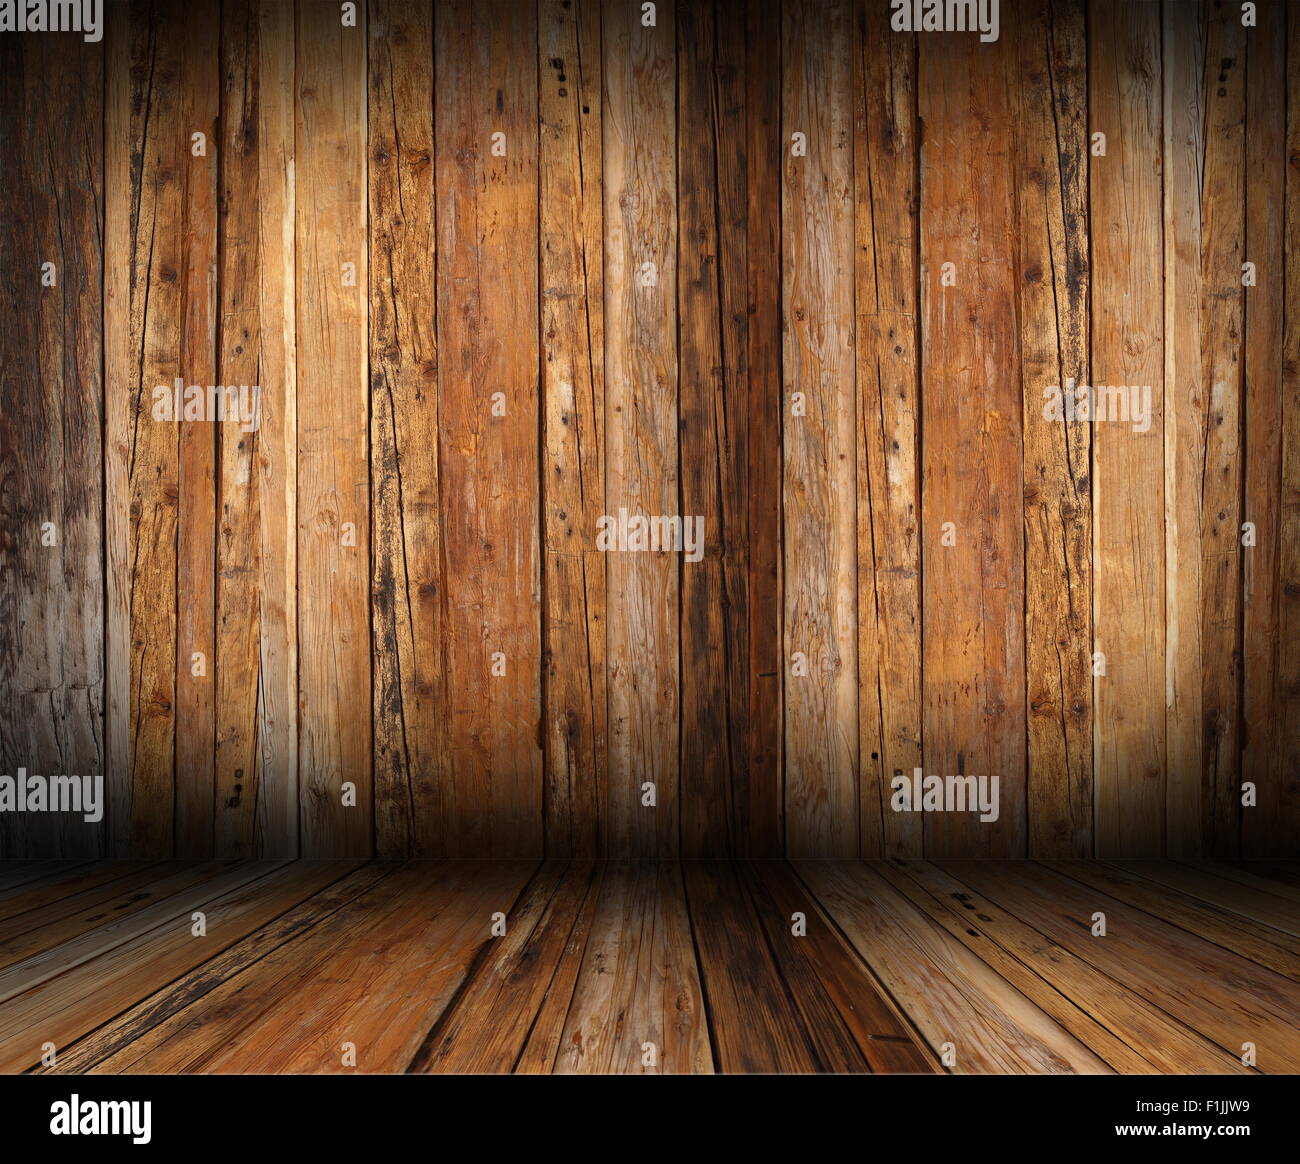 vintage wooden interior room backdrop with old wood planks Stock Photo